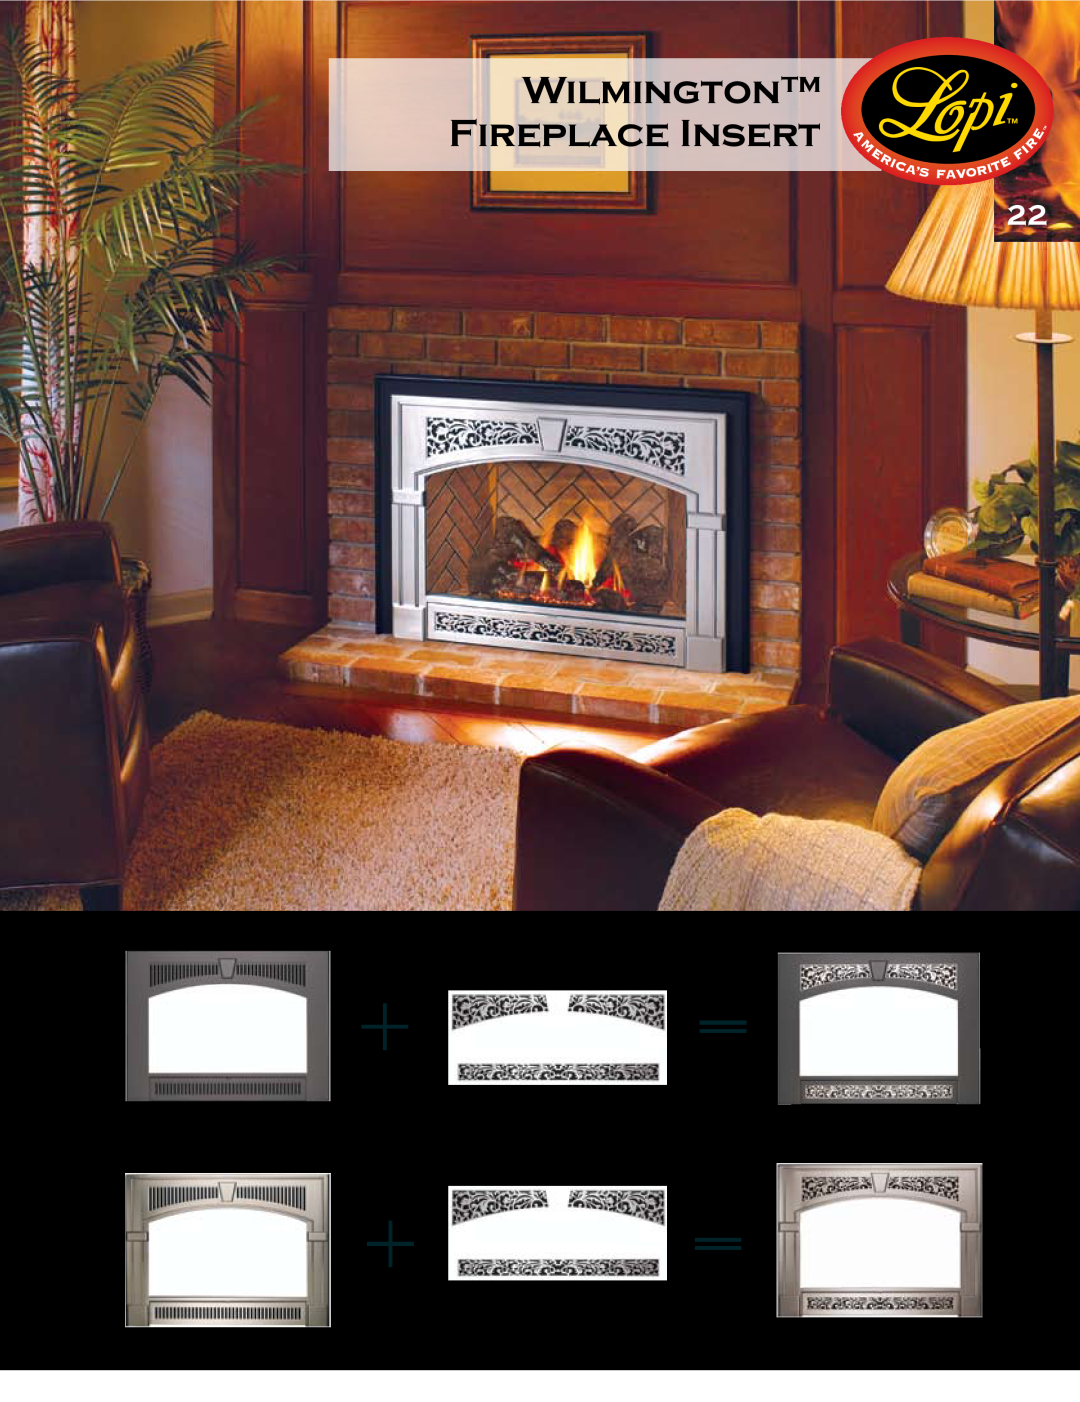 Lopi Gas Stove And Fireplace manual Wilmington Fireplace Insert, Or order the optional pewter 